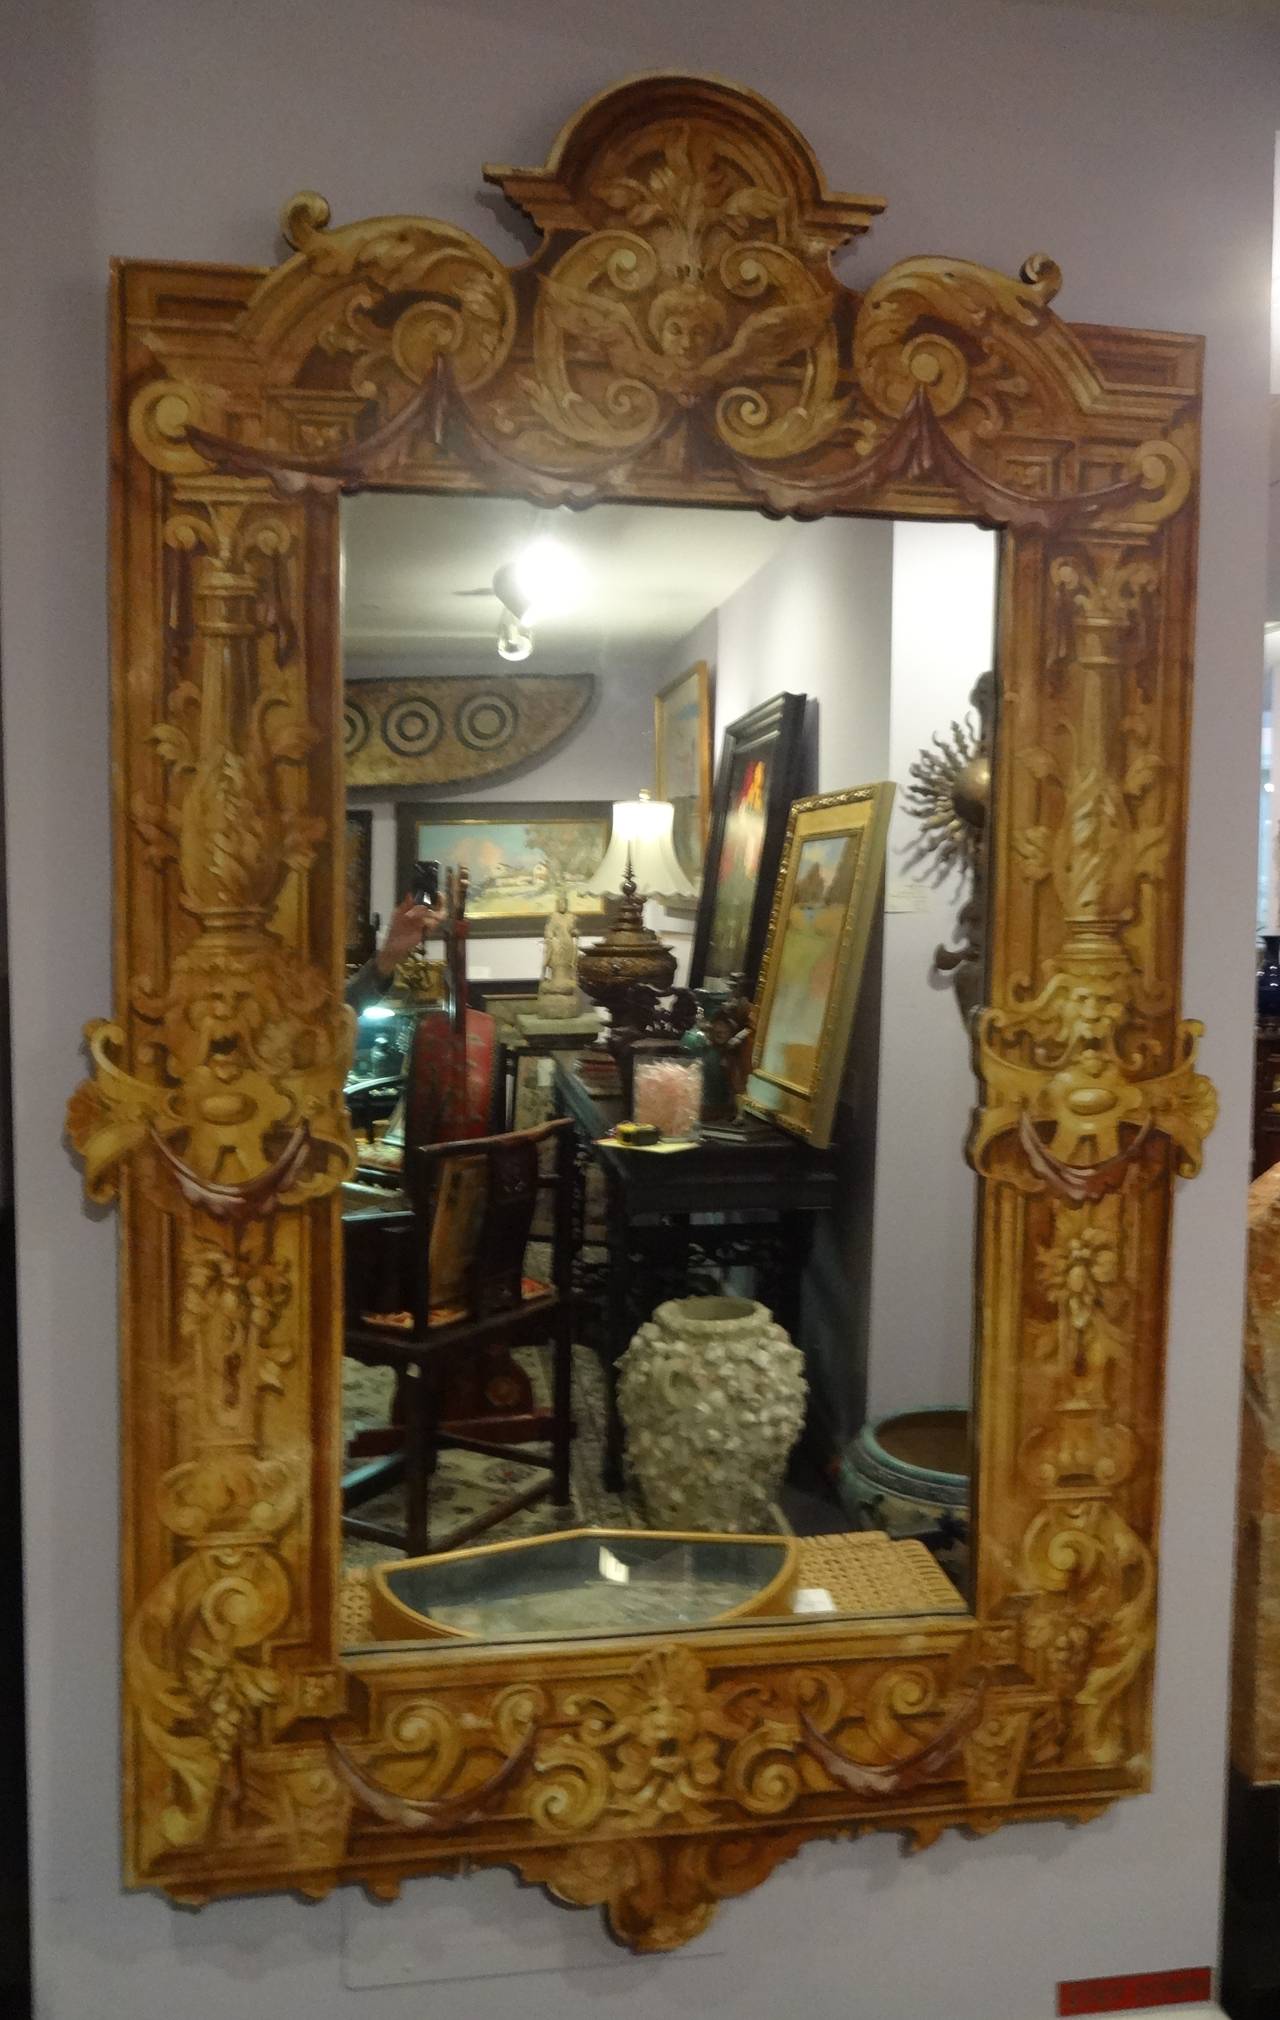 A Patina trompe l'oeil hand painted carved wood mirror in sepia tones 